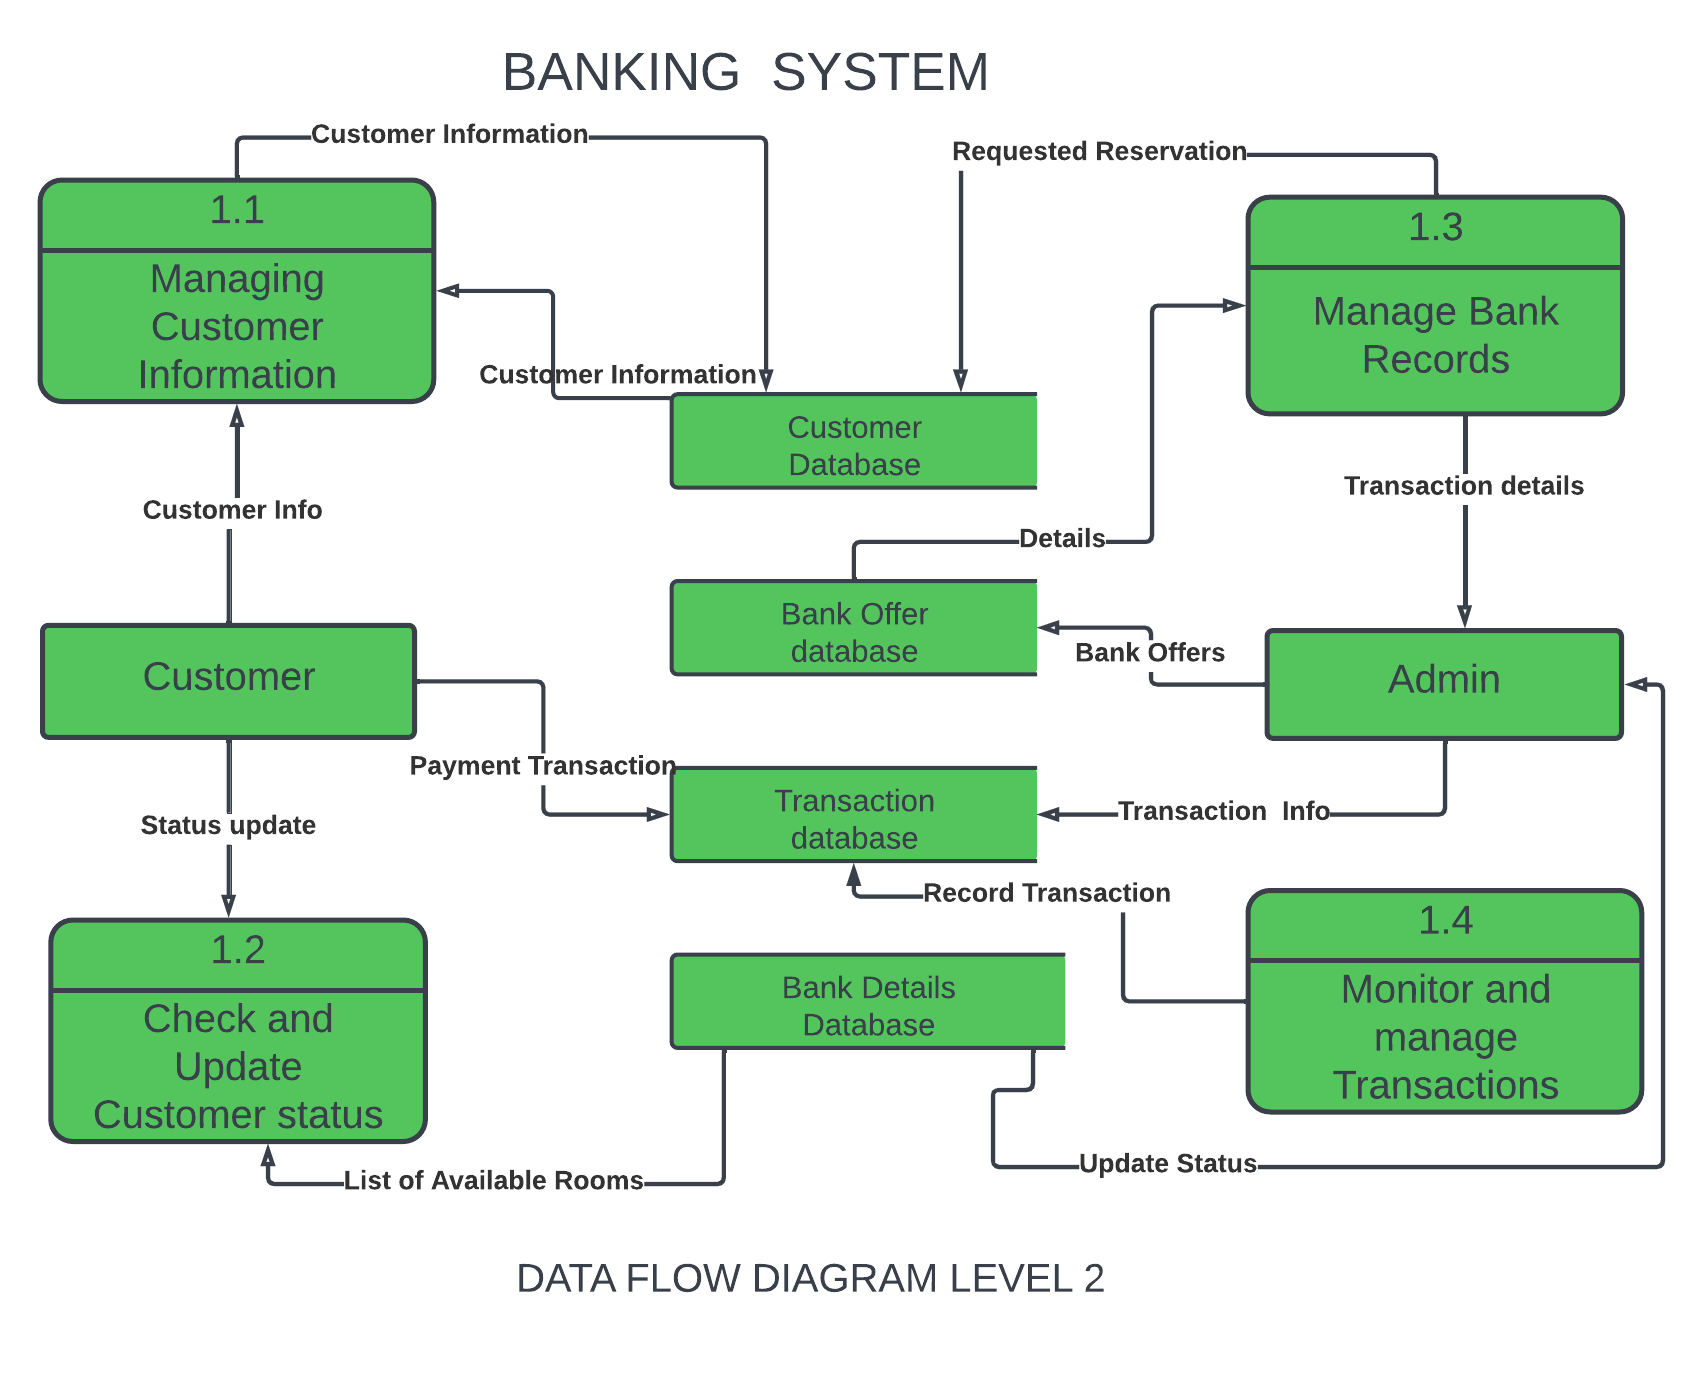 DFD BANKING SYSTEM LEVEL 2